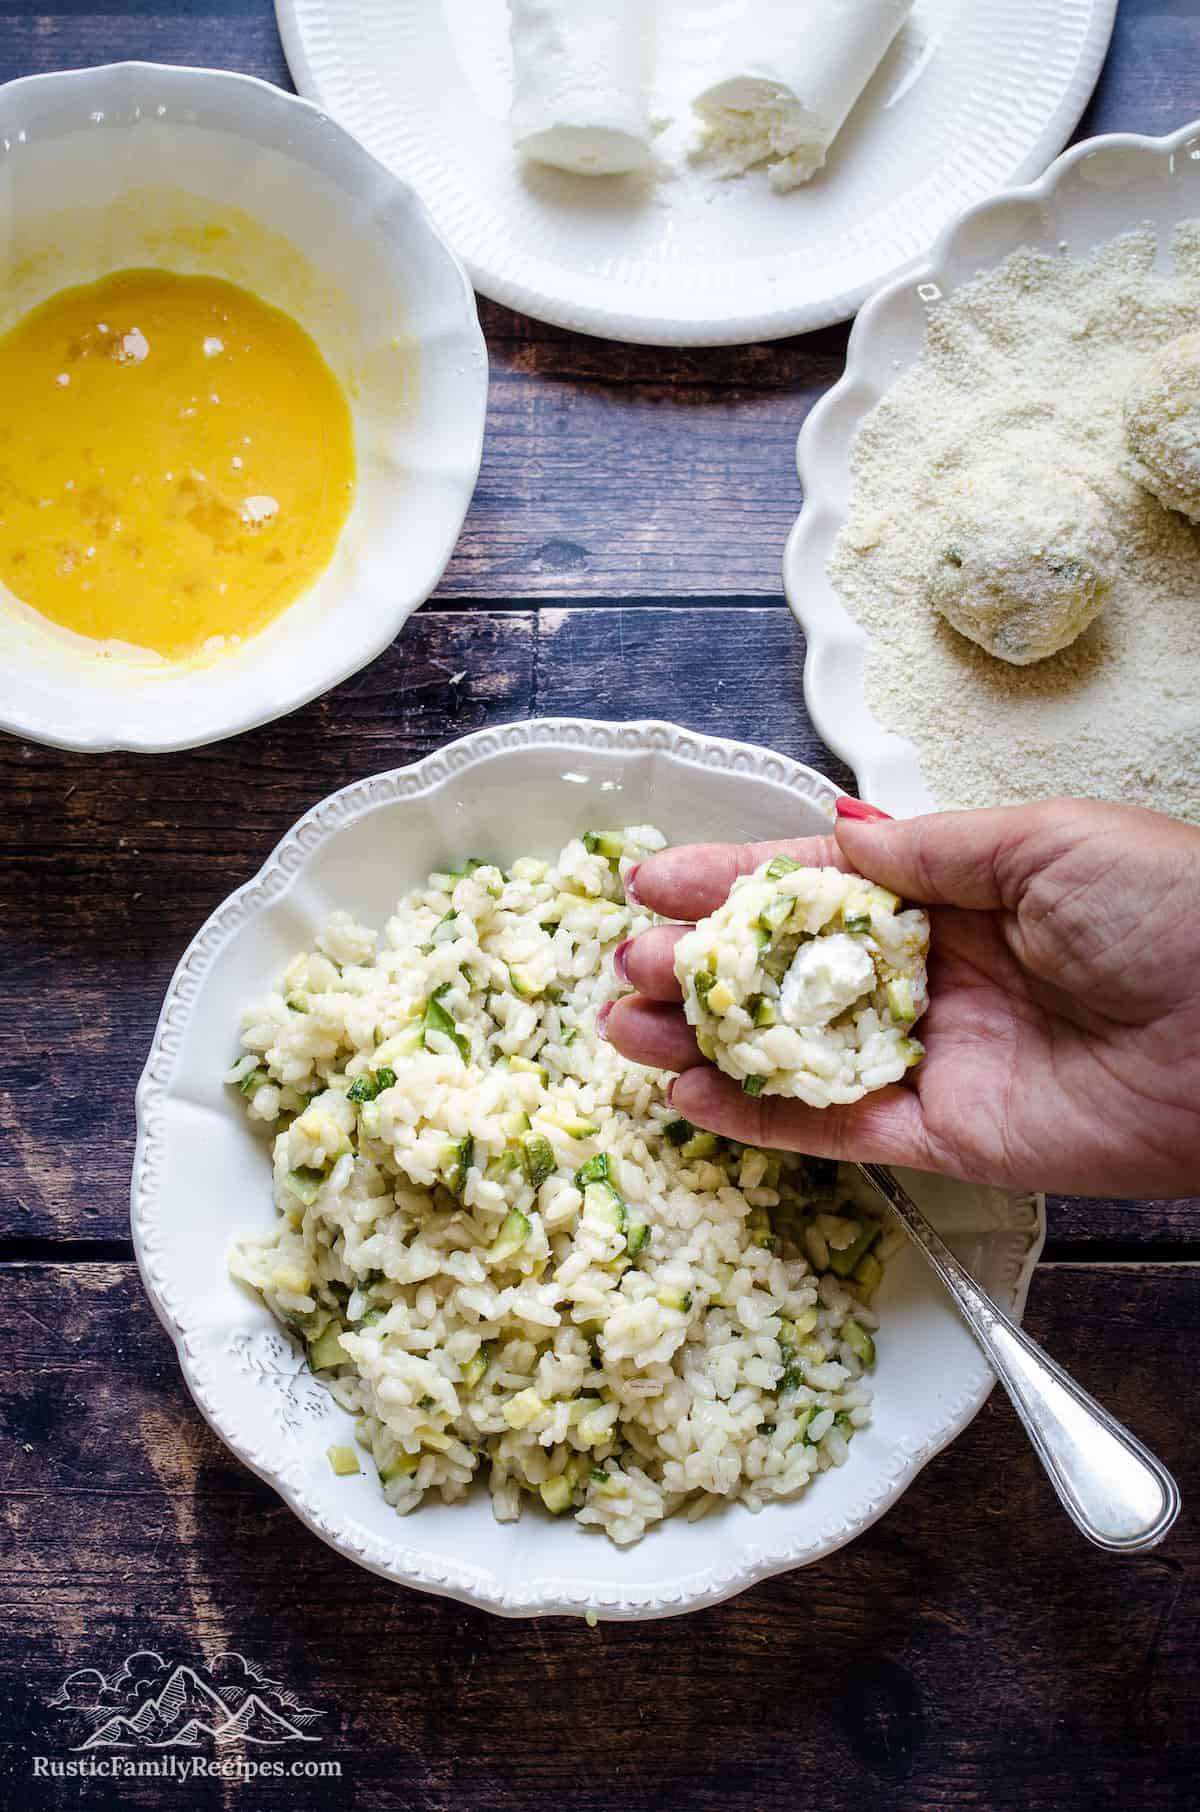 A hand holding a portion of cooked risotto with a piece of goat cheese in the center, over a bowl of zucchini risotto surrounded with bowls filled with coating ingredients.